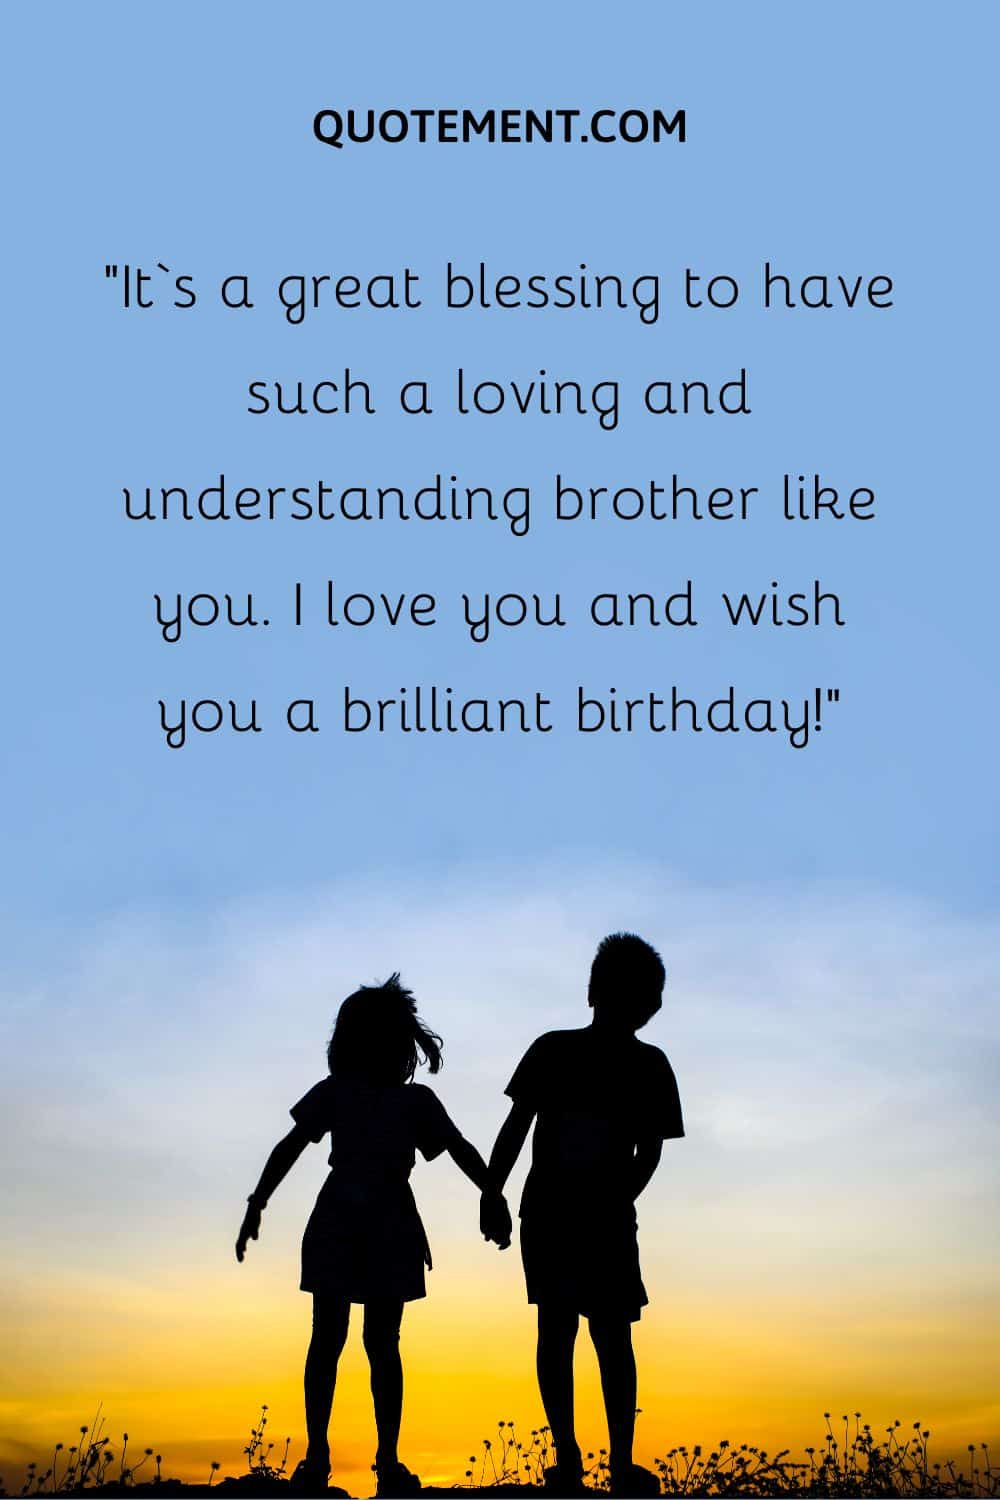 “It‘s a great blessing to have such a loving and understanding brother like you. I love you and wish you a brilliant birthday!”